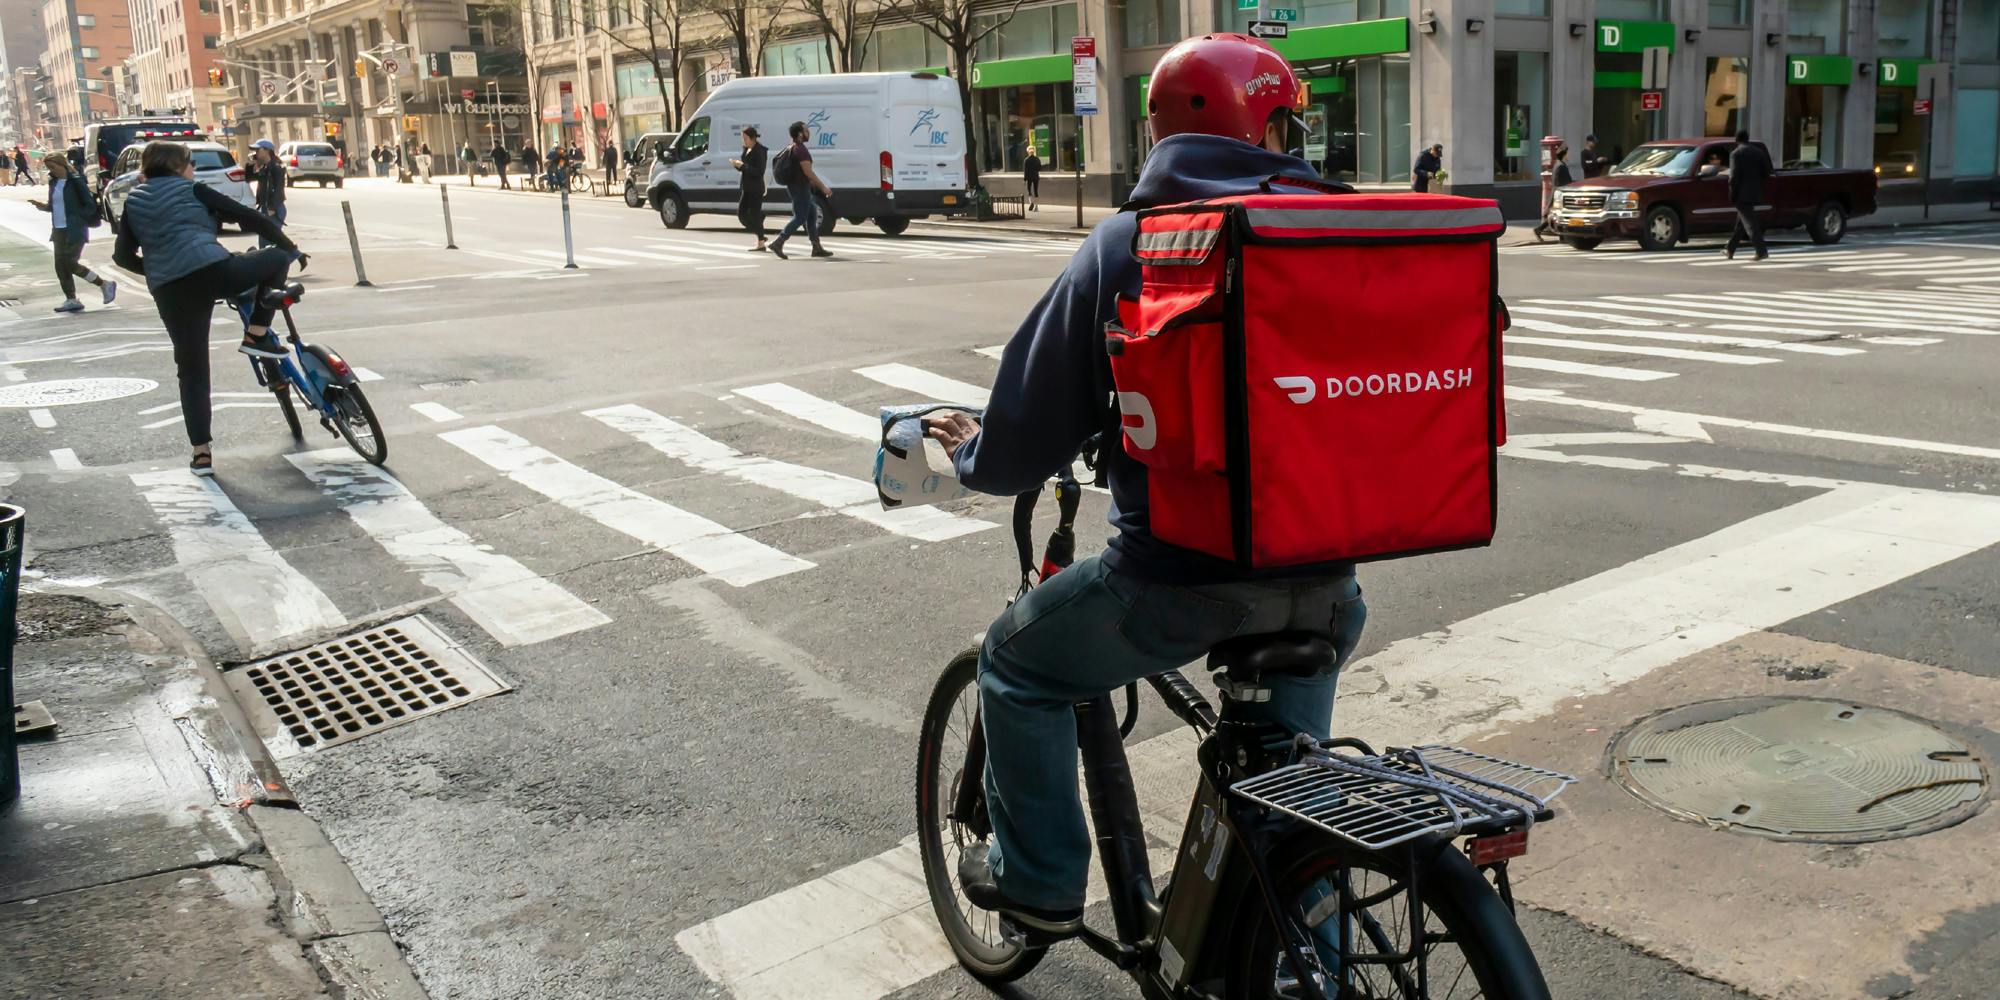 DoorDash Agrees to 5 Million Settlement With San Fran in Labor Dispute